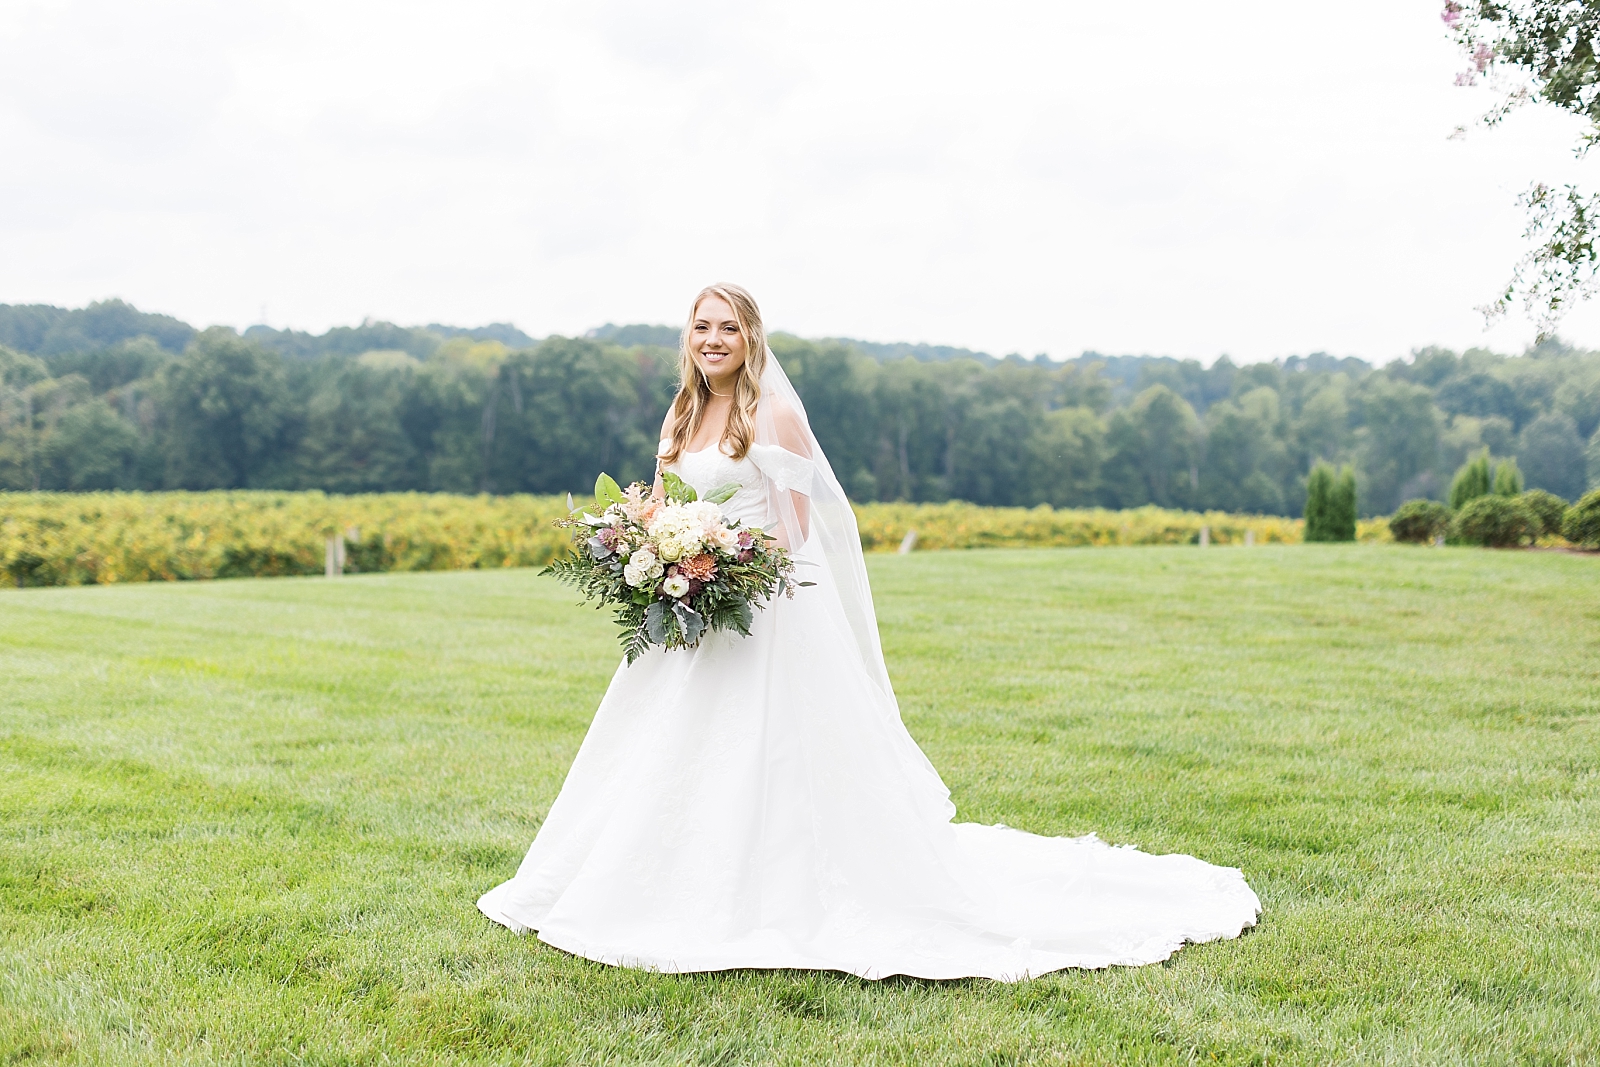 Bride out on the lawn | NC Wedding Photographer | VA wedding photographer | Vineyard Weddings